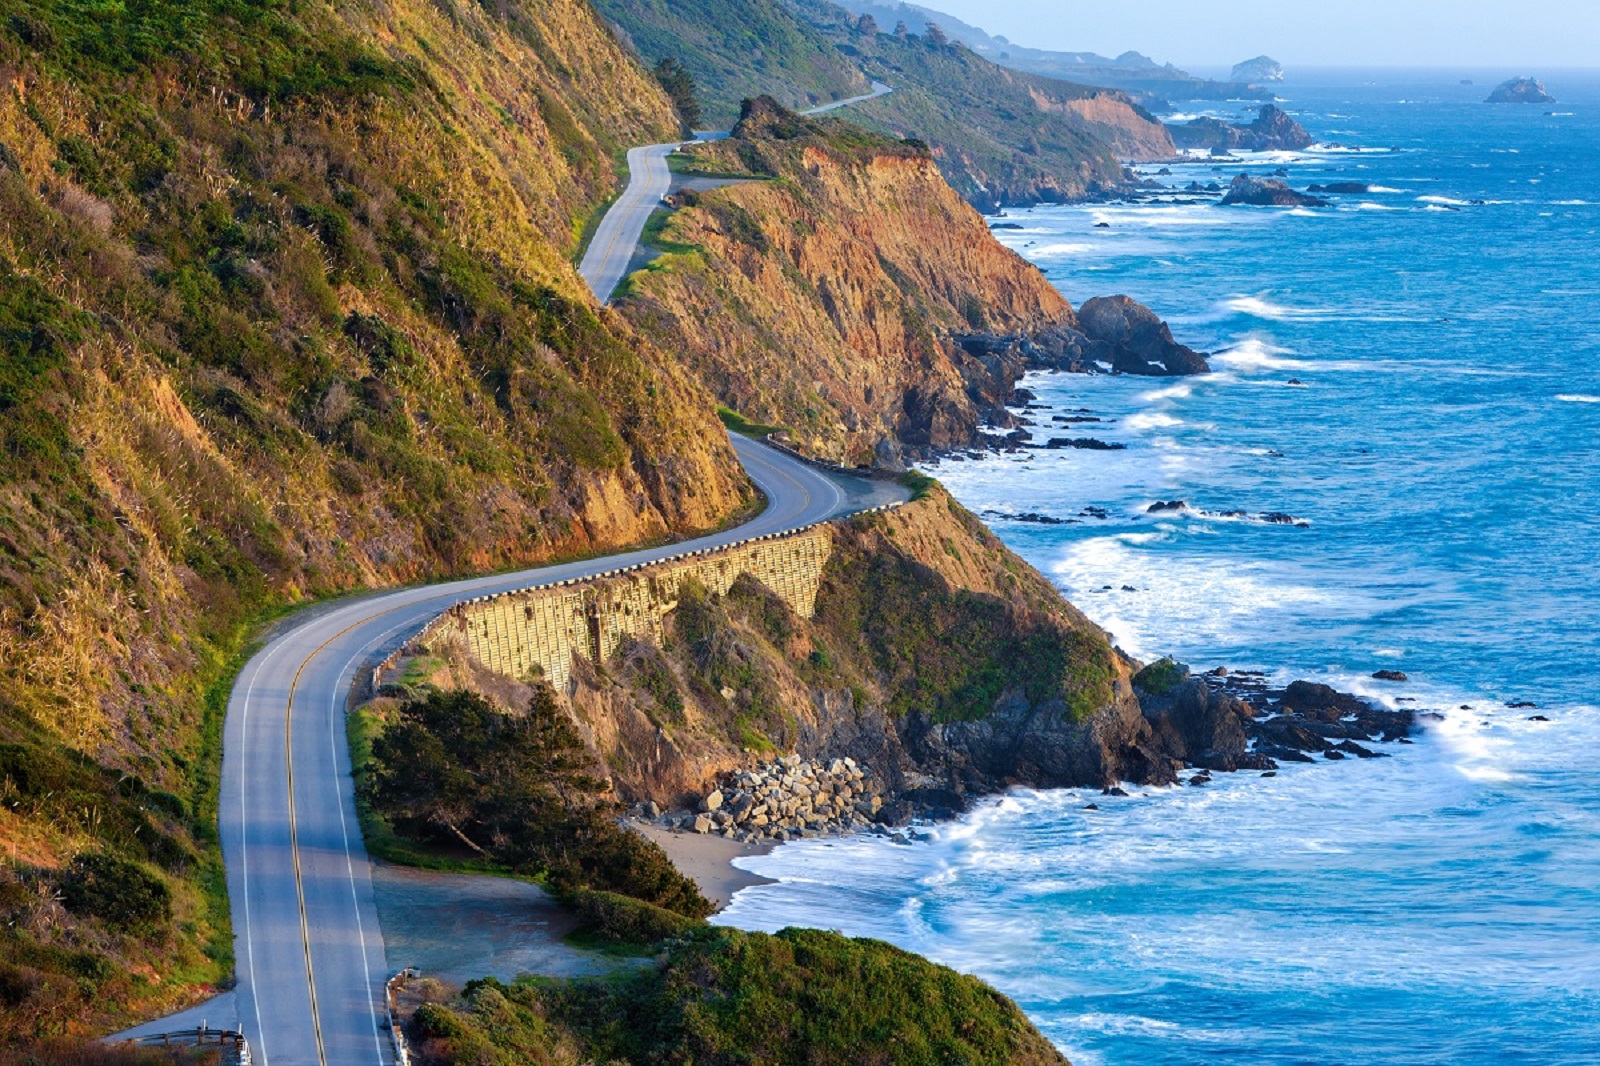 <p class="wp-caption-text">Image Credit: Shutterstock / Doug Meek</p>  <p><span>Cruise along the iconic Pacific Coast Highway for stunning ocean views, winding roads, and picturesque coastal towns. Start your journey in Los Angeles and make your way up to San Francisco, taking in breathtaking scenery along the way.</span></p>